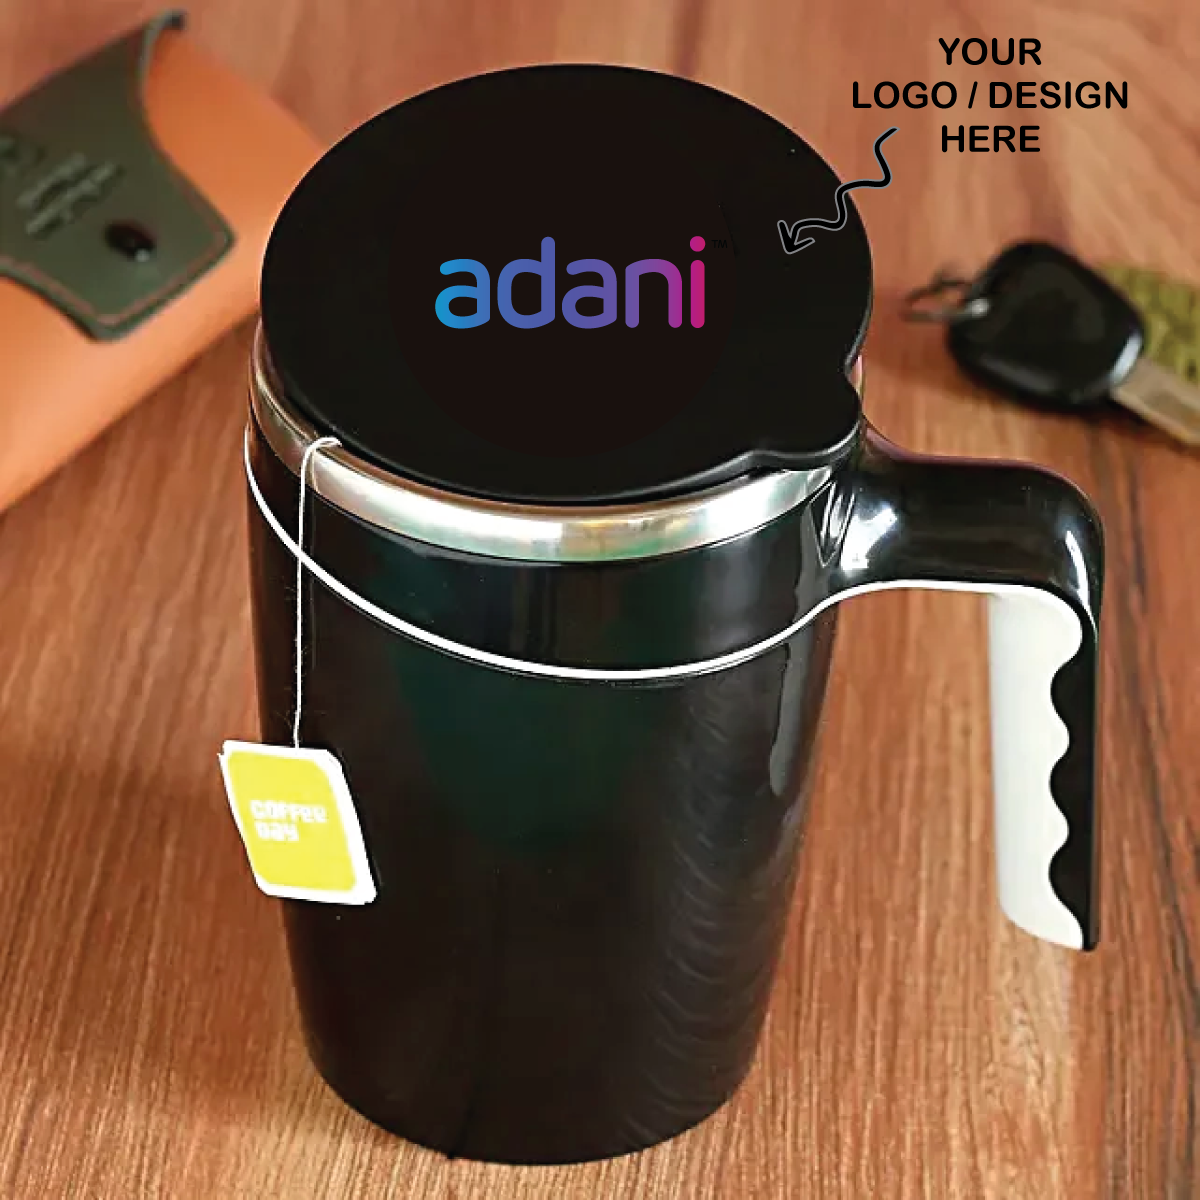 Personalized Black 470ml Spill Free Suction SS Mug - For Corporate, Client or Dealer Gifting, Promotional Freebie BGH168